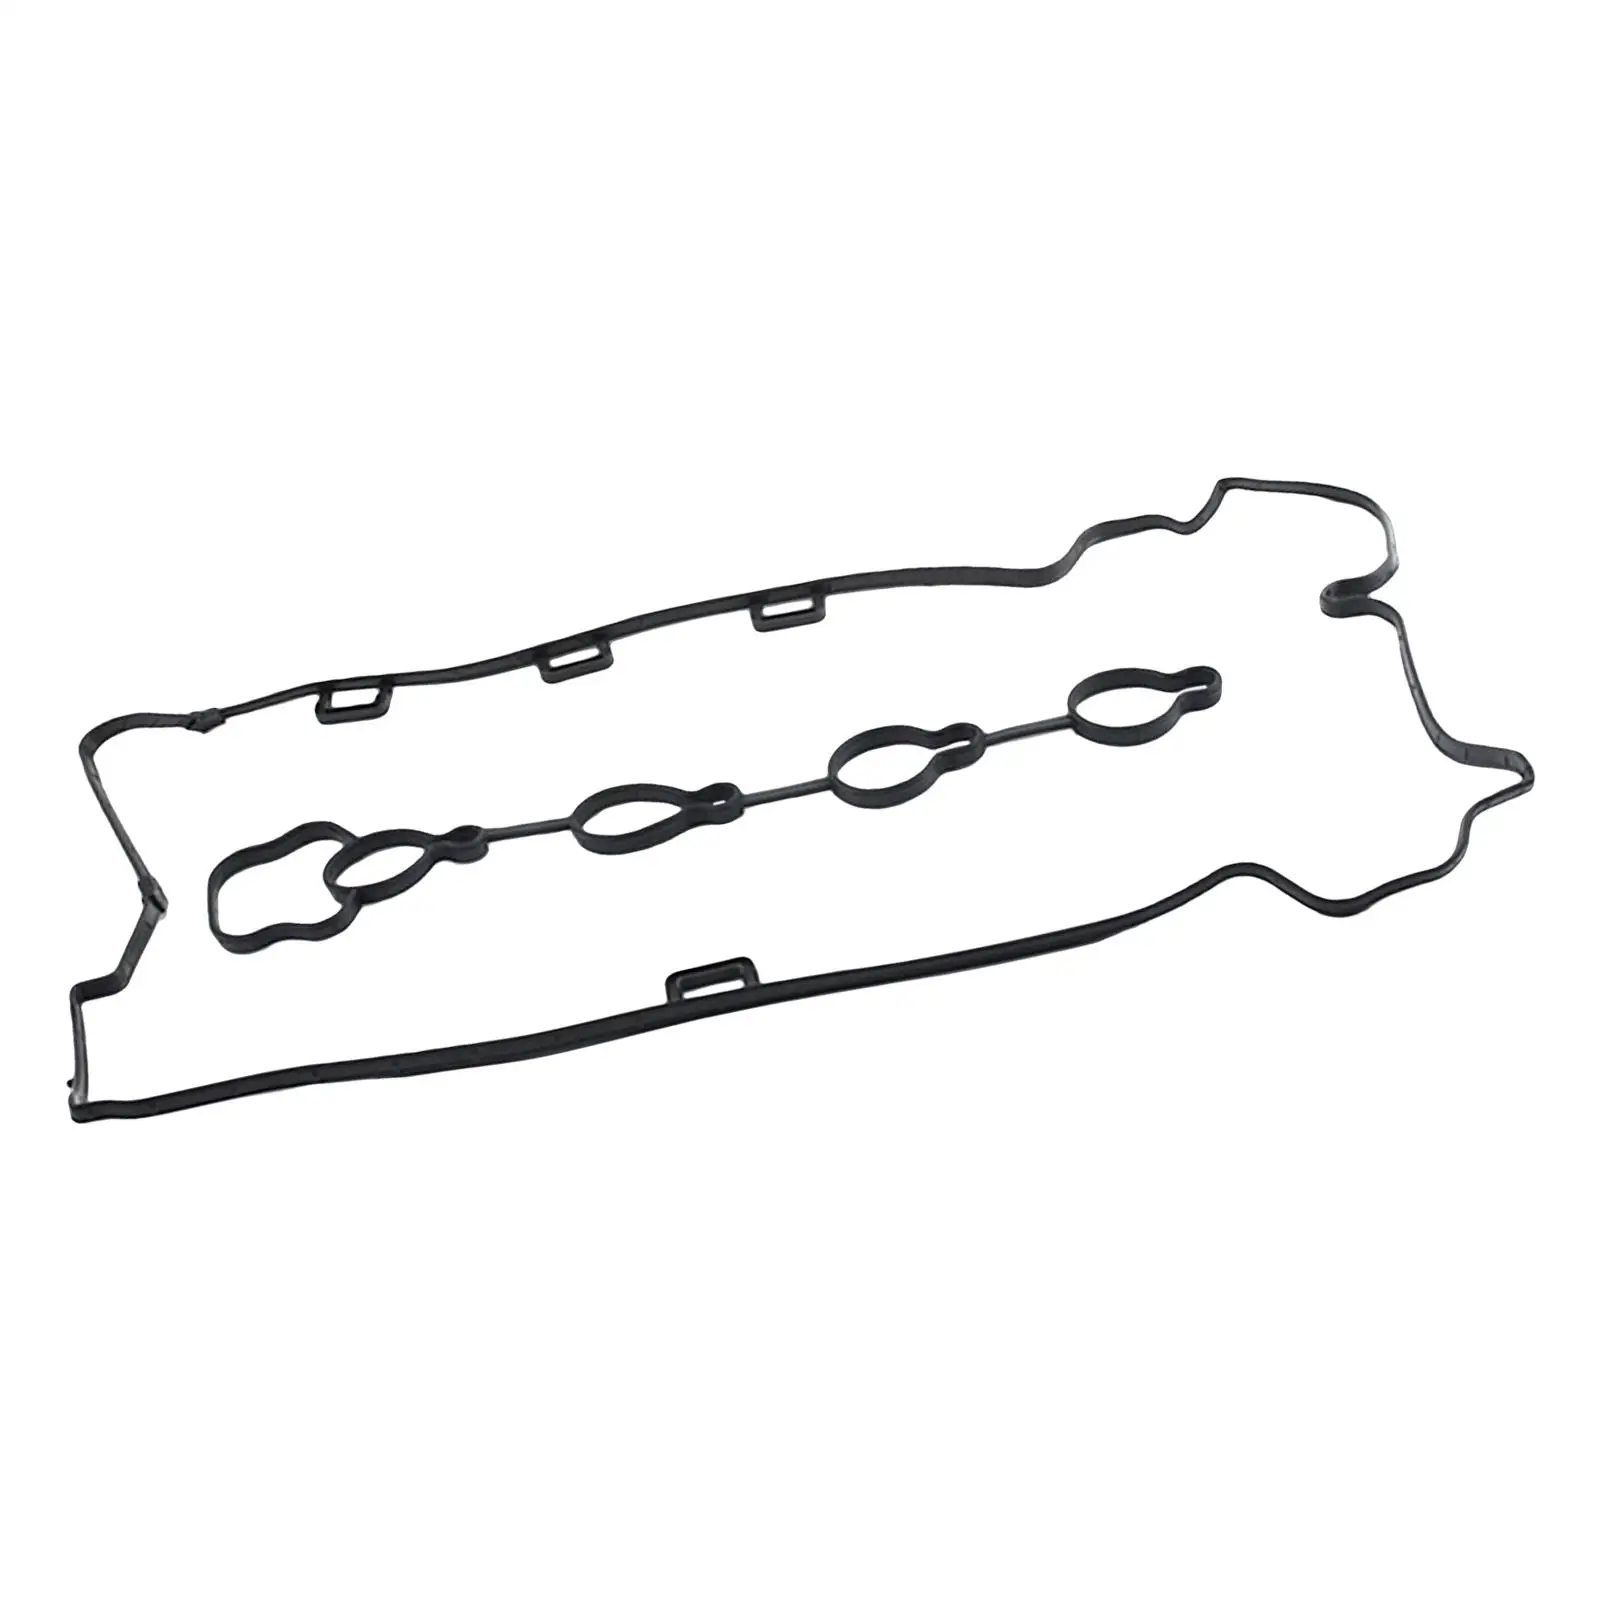  Set Engine Cover Gasket   Rubber Pad for 2609291, for 2.4608604